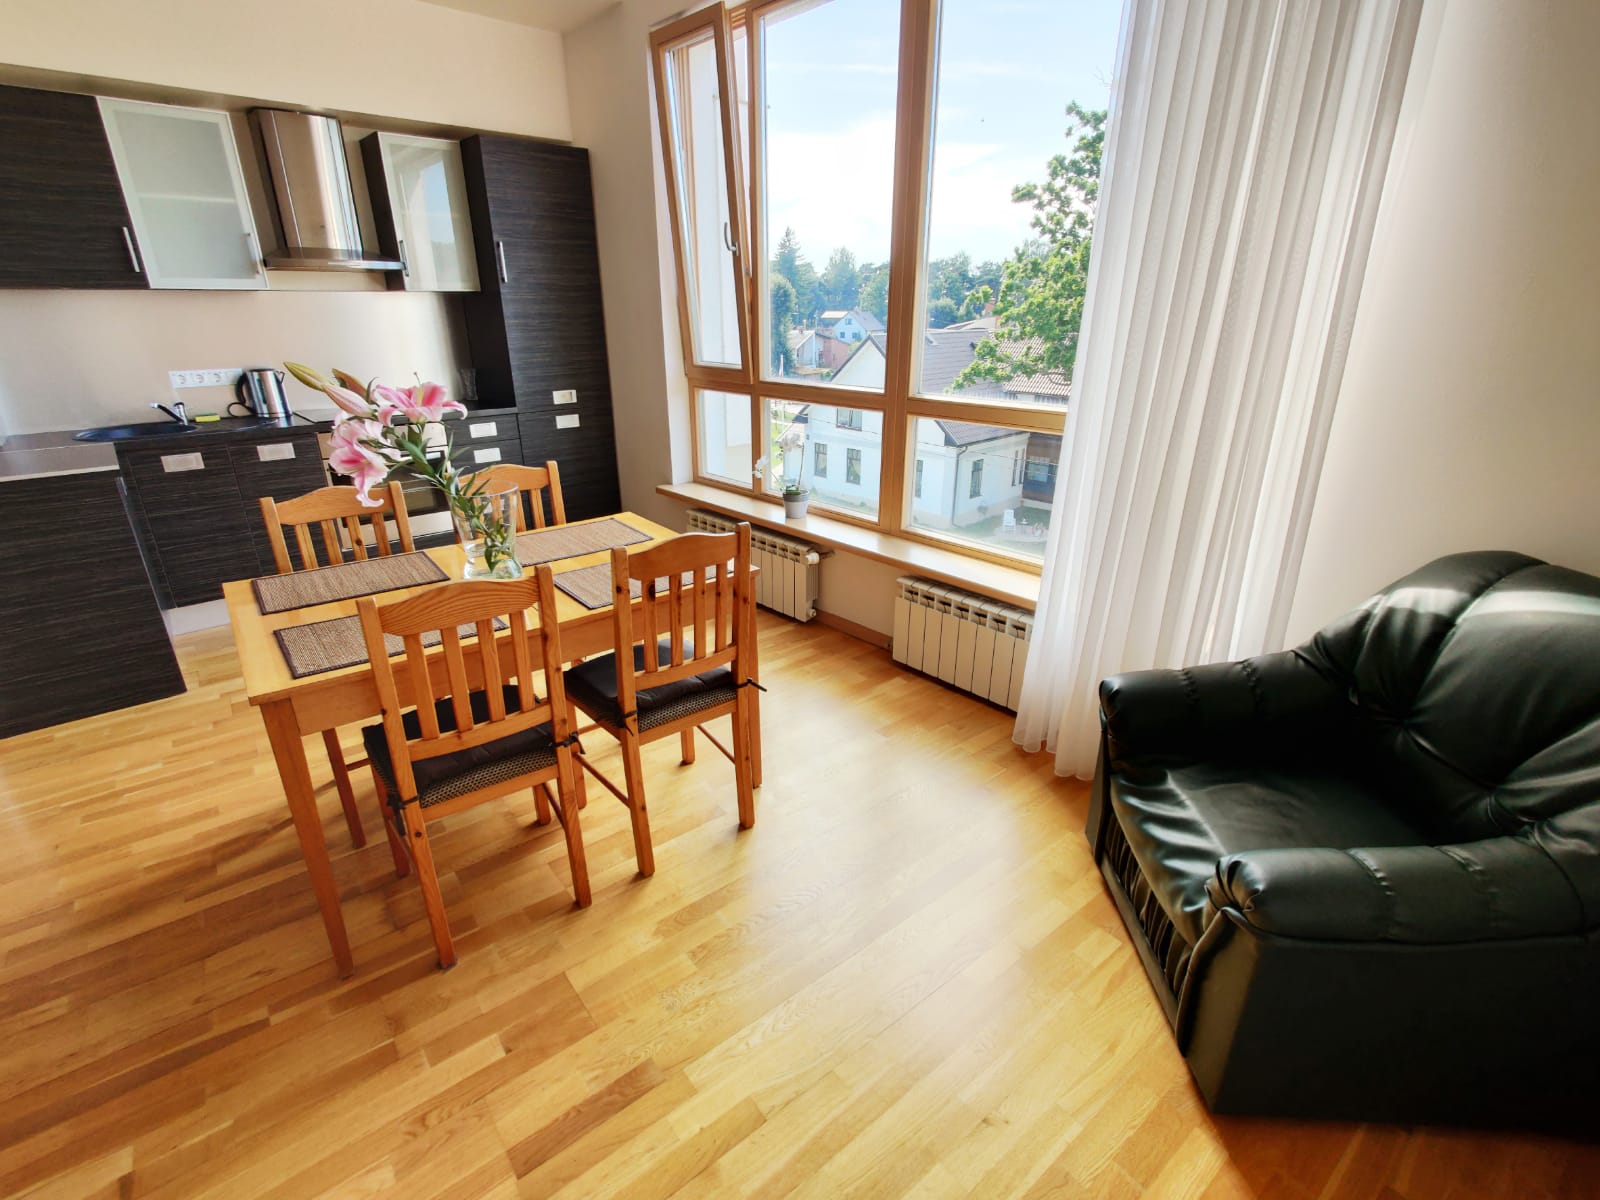 Apartment for rent, Liepu street 1 - Image 1